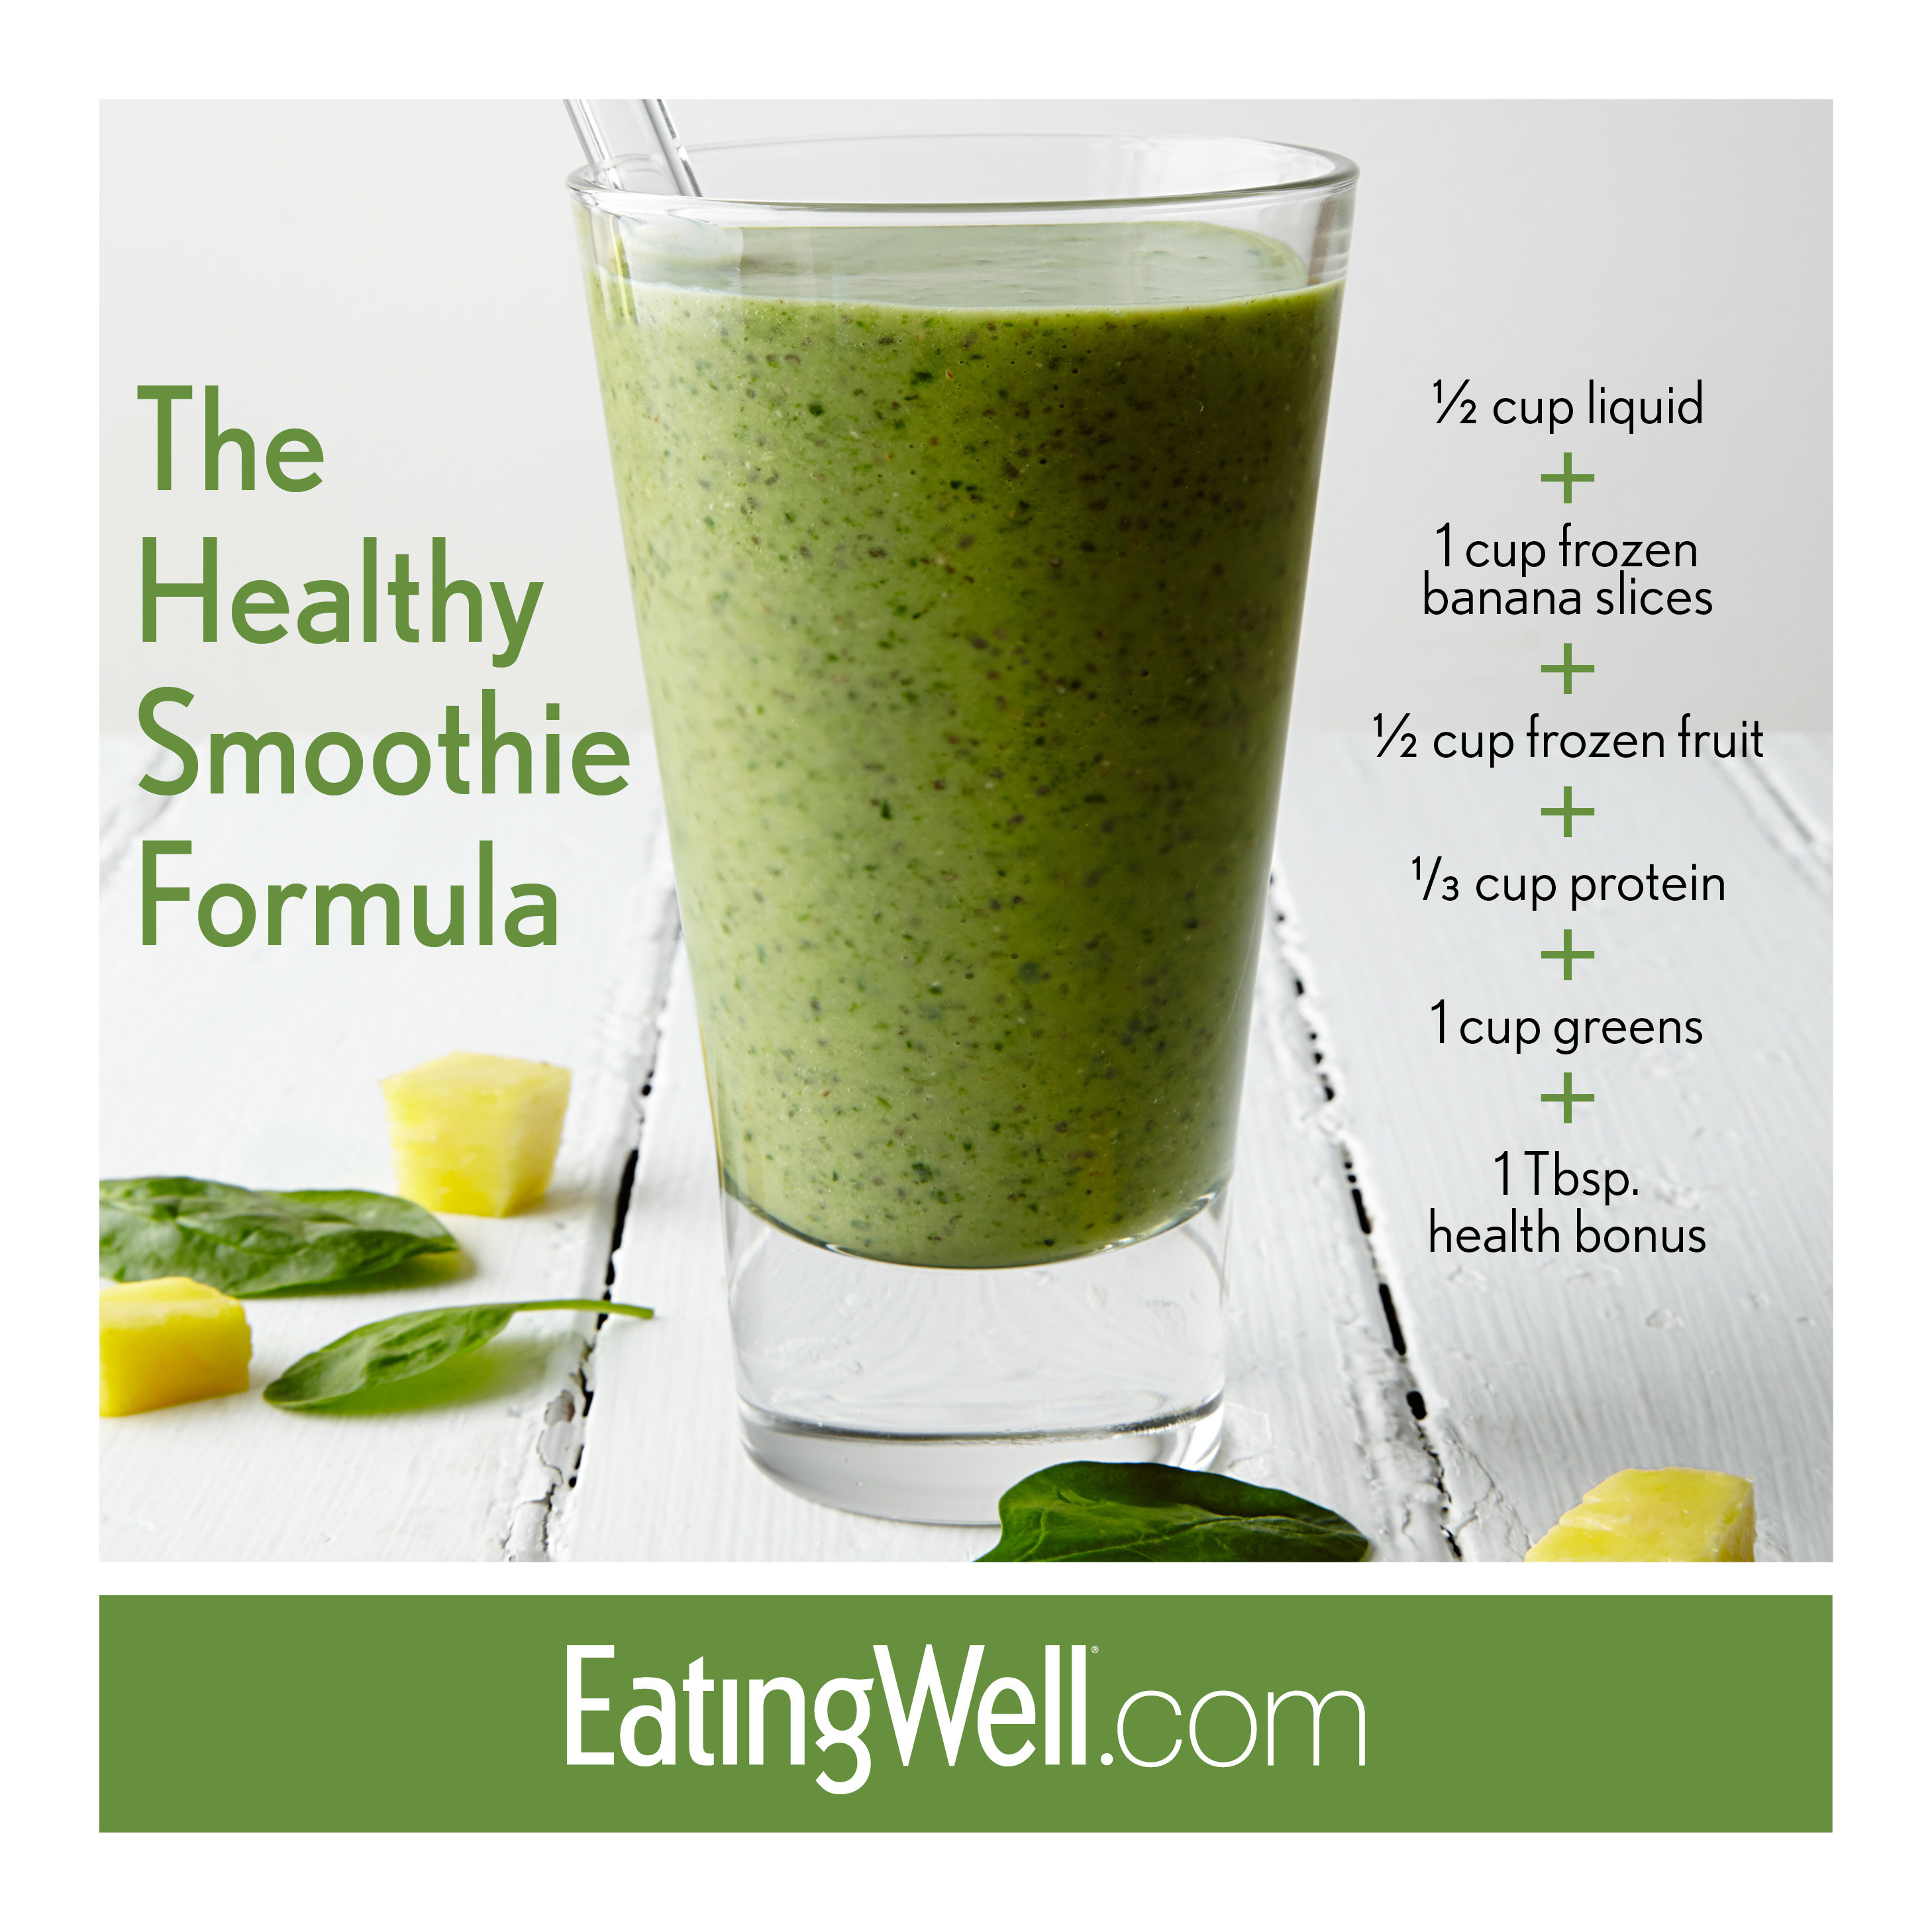 Smoothie Healthy Recipes
 The Ultimate Green Smoothie Recipe EatingWell